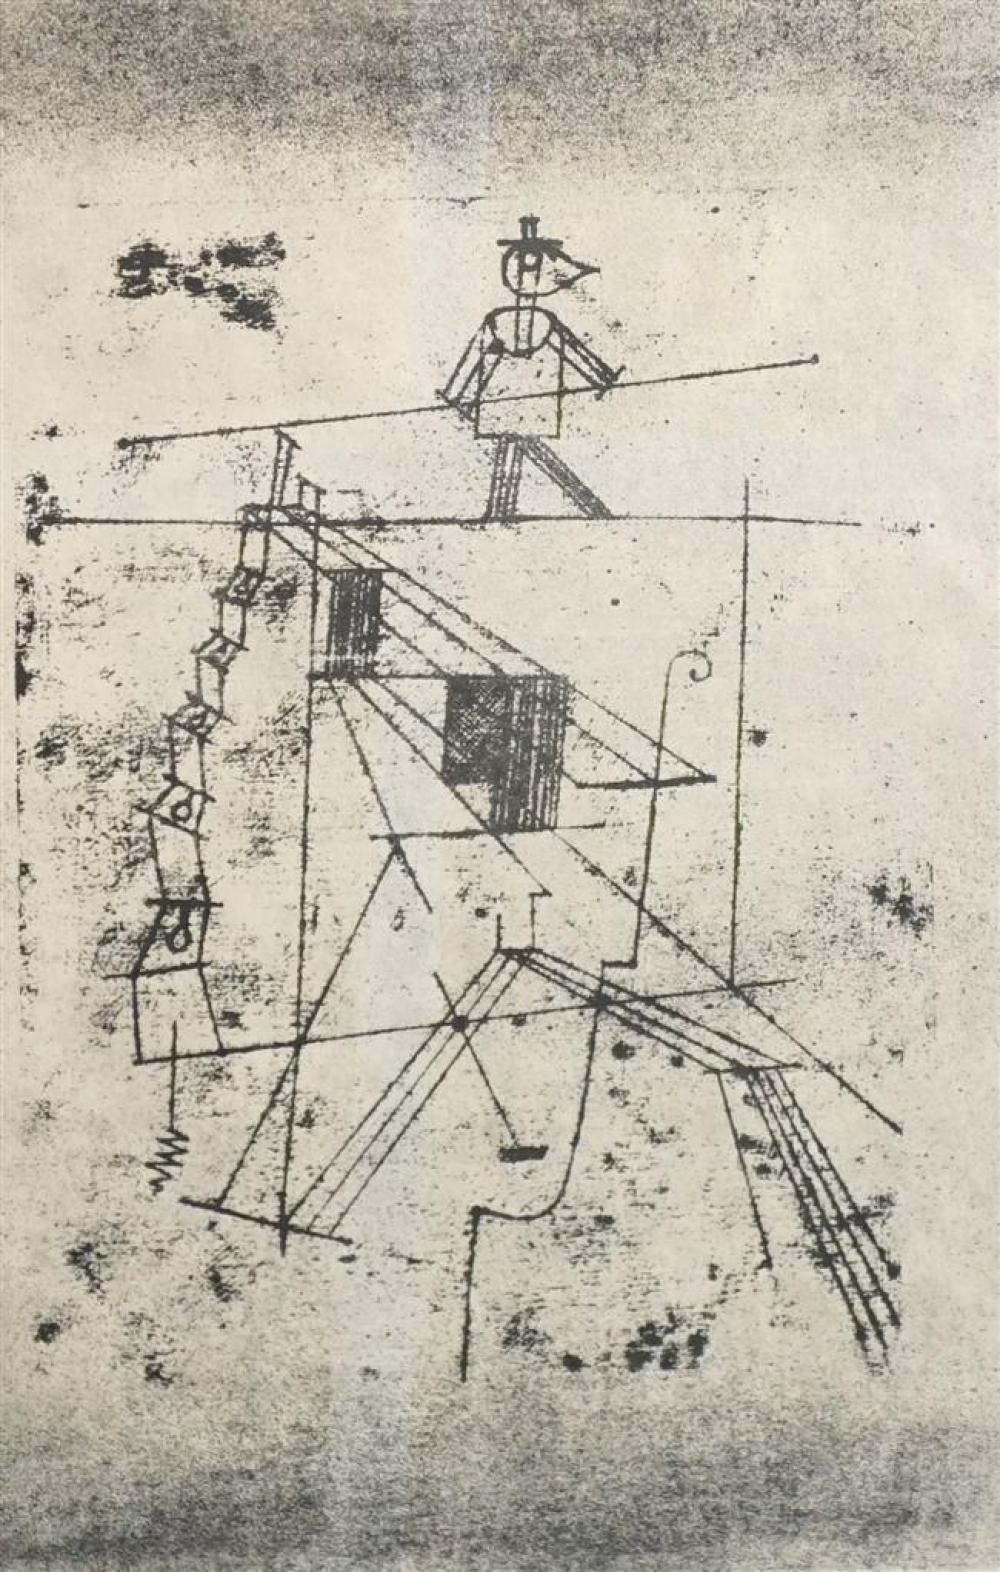 AFTER PAUL KLEE, MAN ON A TIGHTROPE,